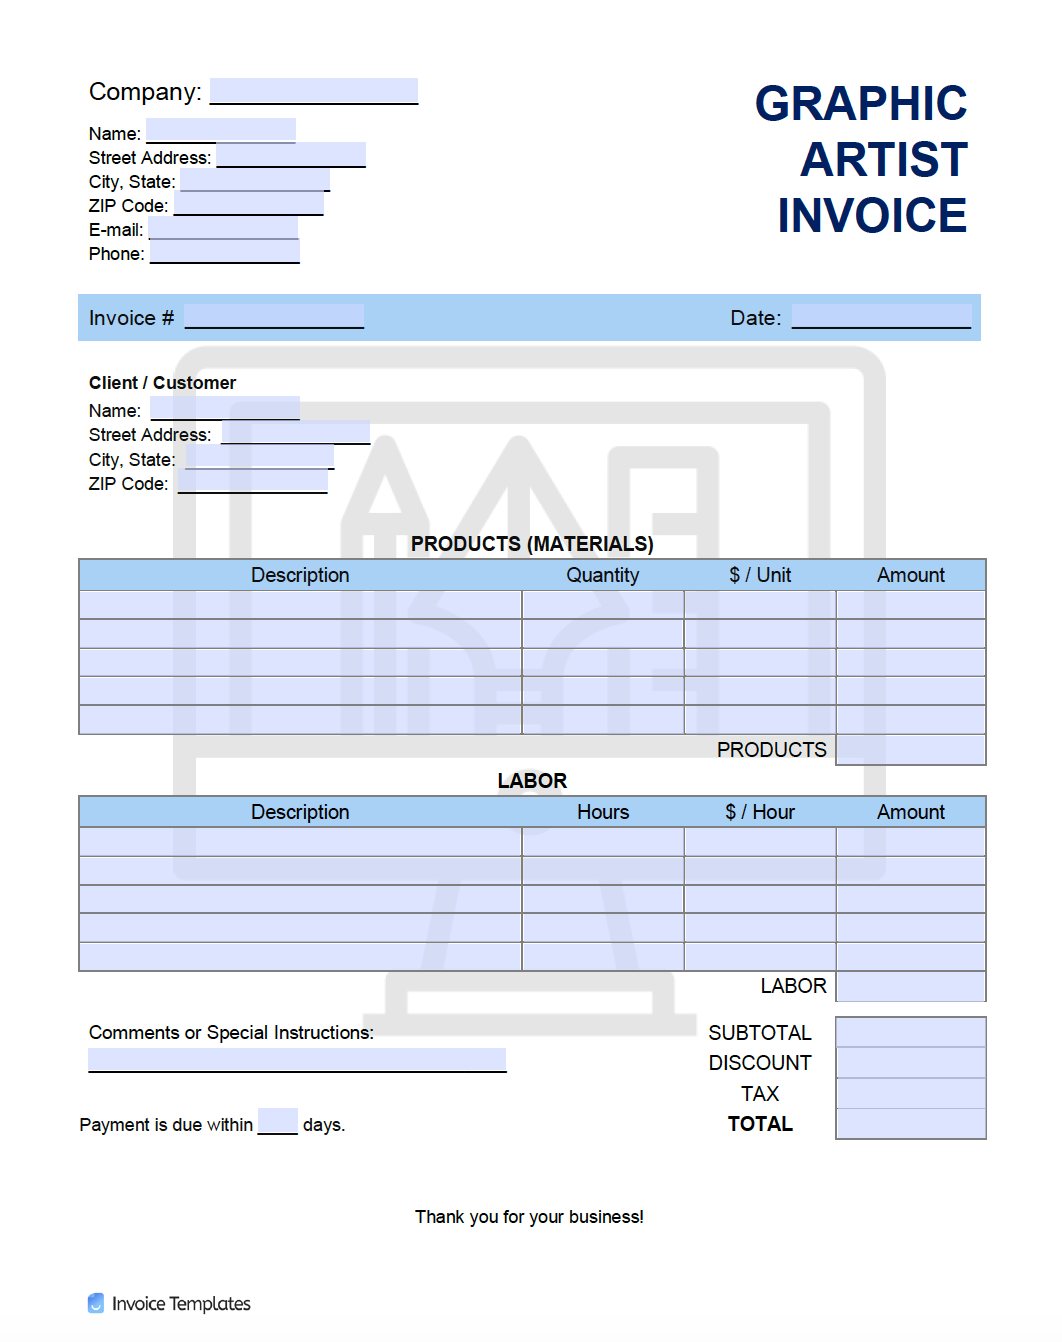 Free Graphic Artist Invoice Template PDF WORD EXCEL